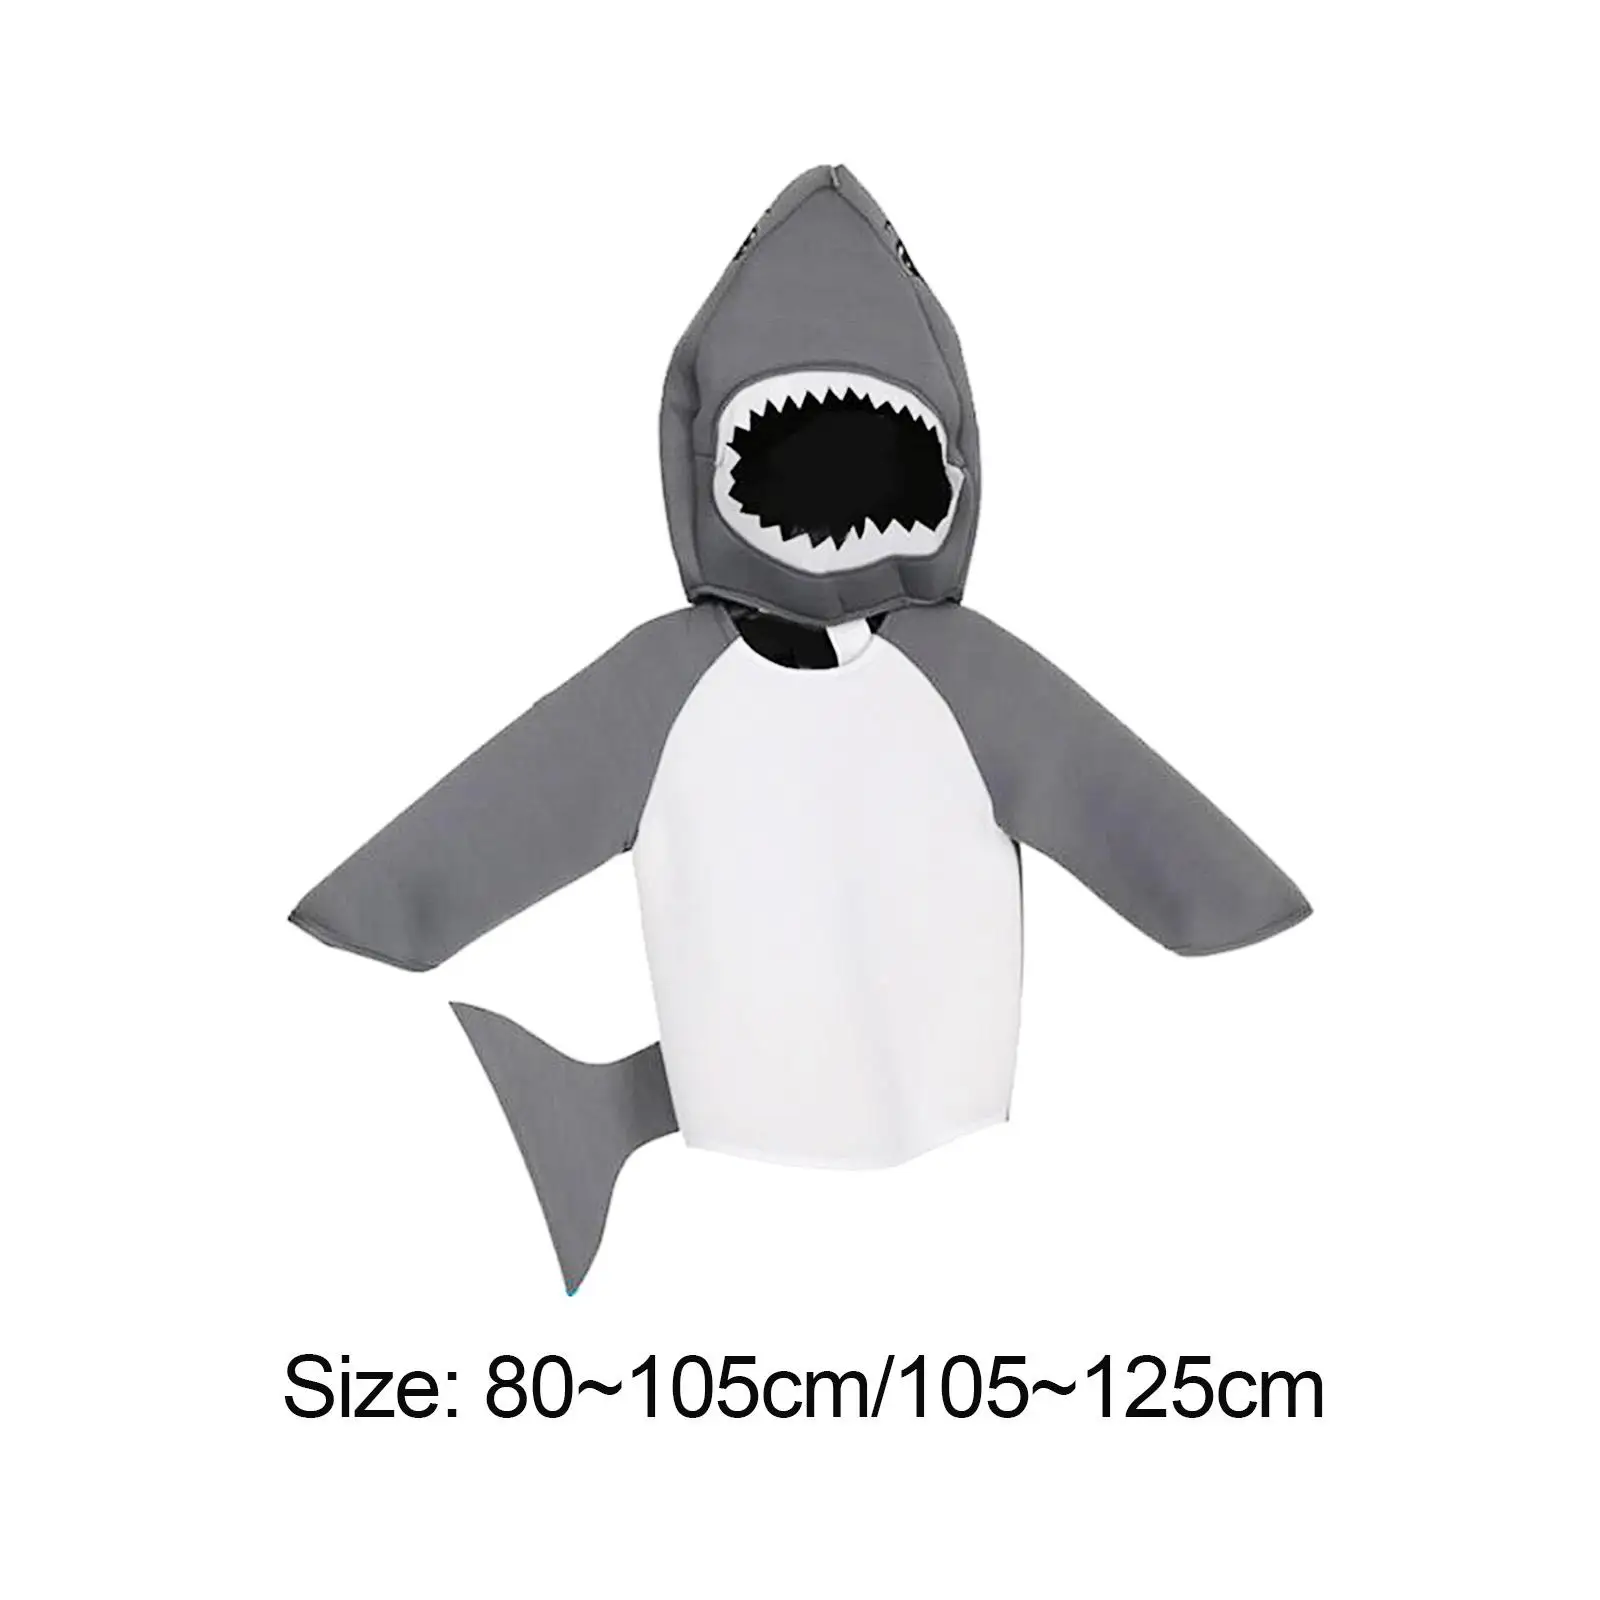 Kids Shark Costume Fancy Dress Soft Hoodie Halloween Dress up for Party Children`s Day Carnivals Stage Performance Role Playing